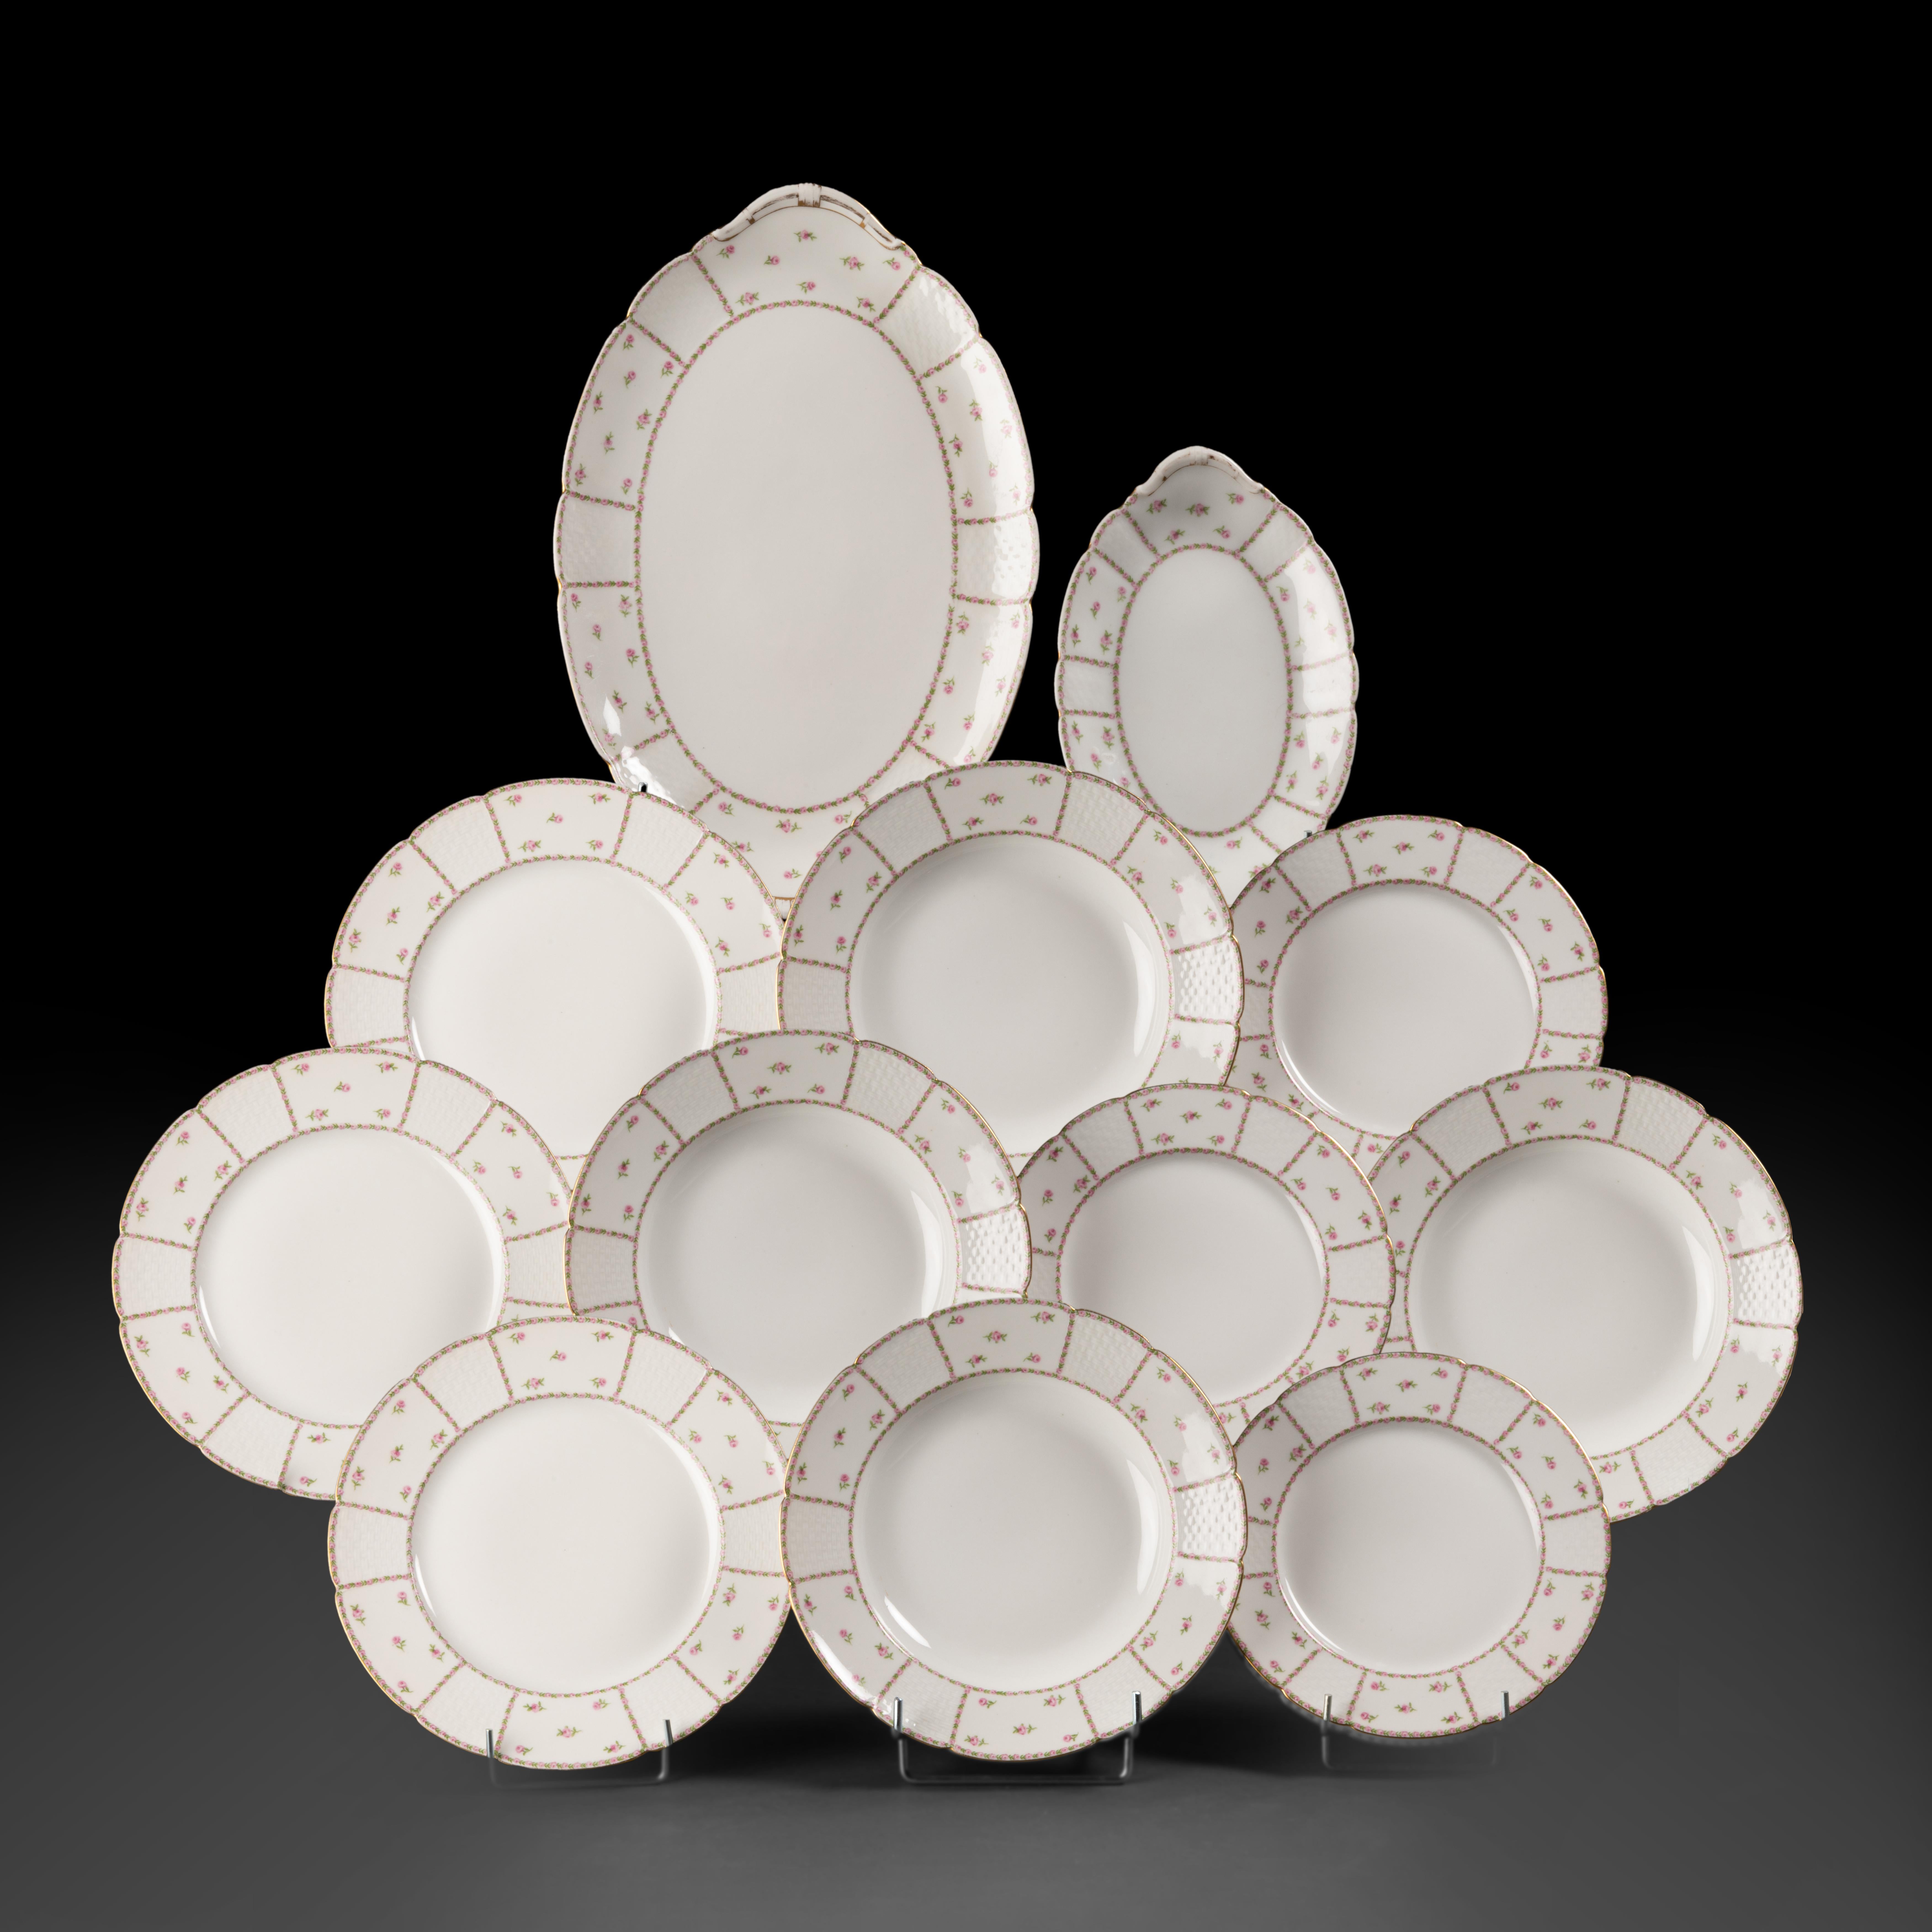 Limoges porcelain tableware by GOA. Very white fine porcelain decorated with small roses and basket weave motif with a gold rim.

Dinner plates (25 cm) - 12x
Soup plates (25 cm) - 9x
Dessert plates (21 cm) - 11
Oval serving dish (37x24 cm) -